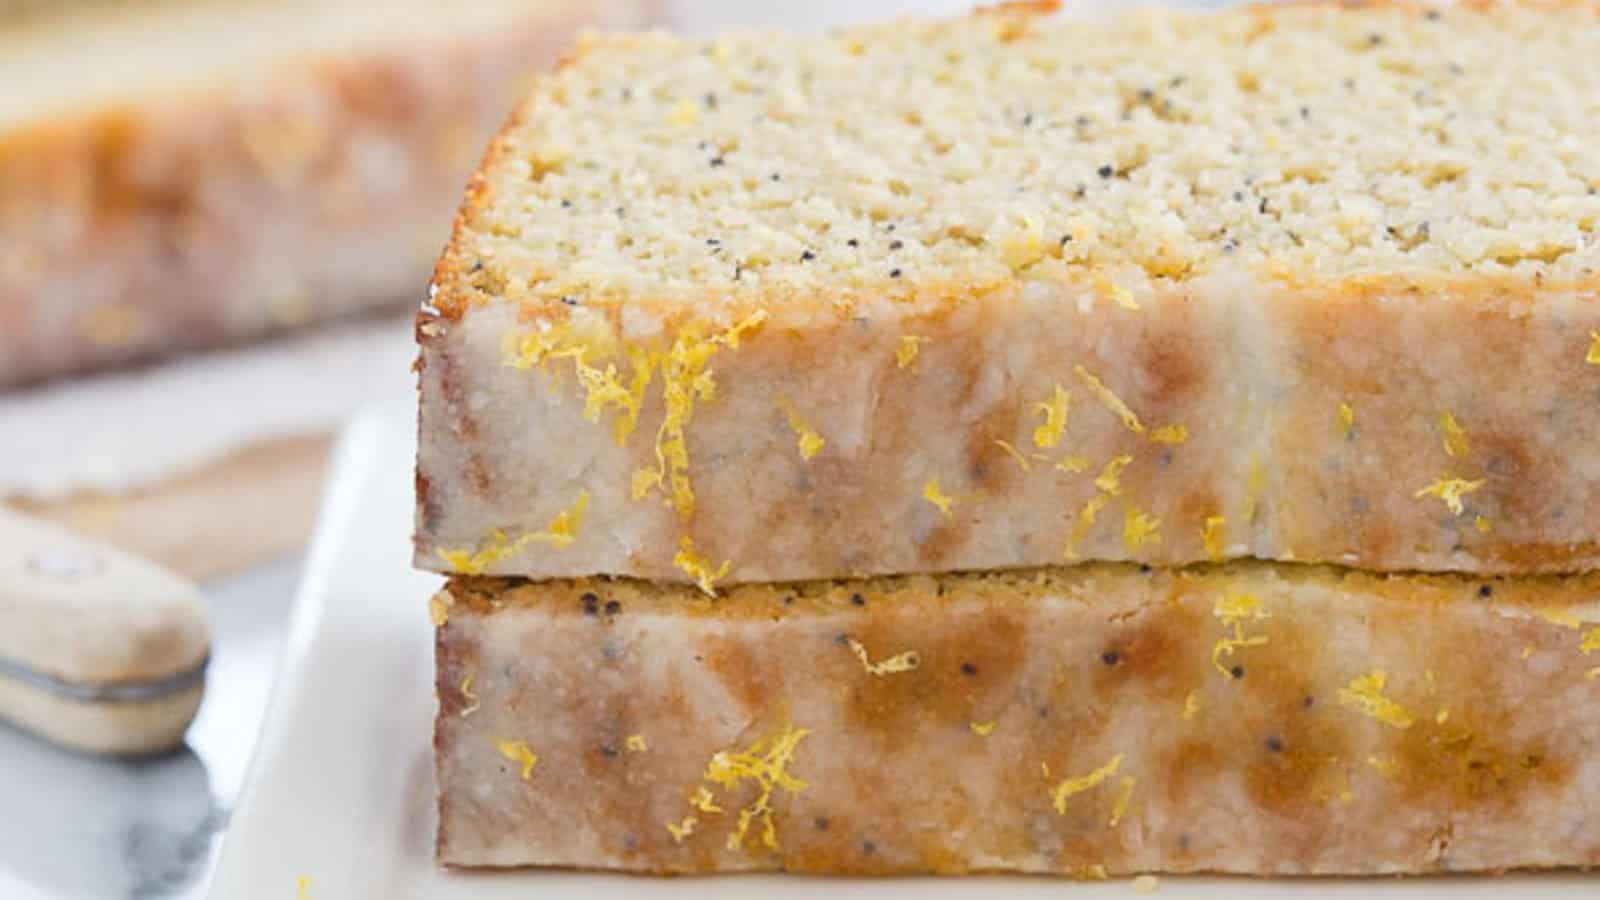 Paleo lemon poppyseed bread slices stacked on top of each other on a plate.